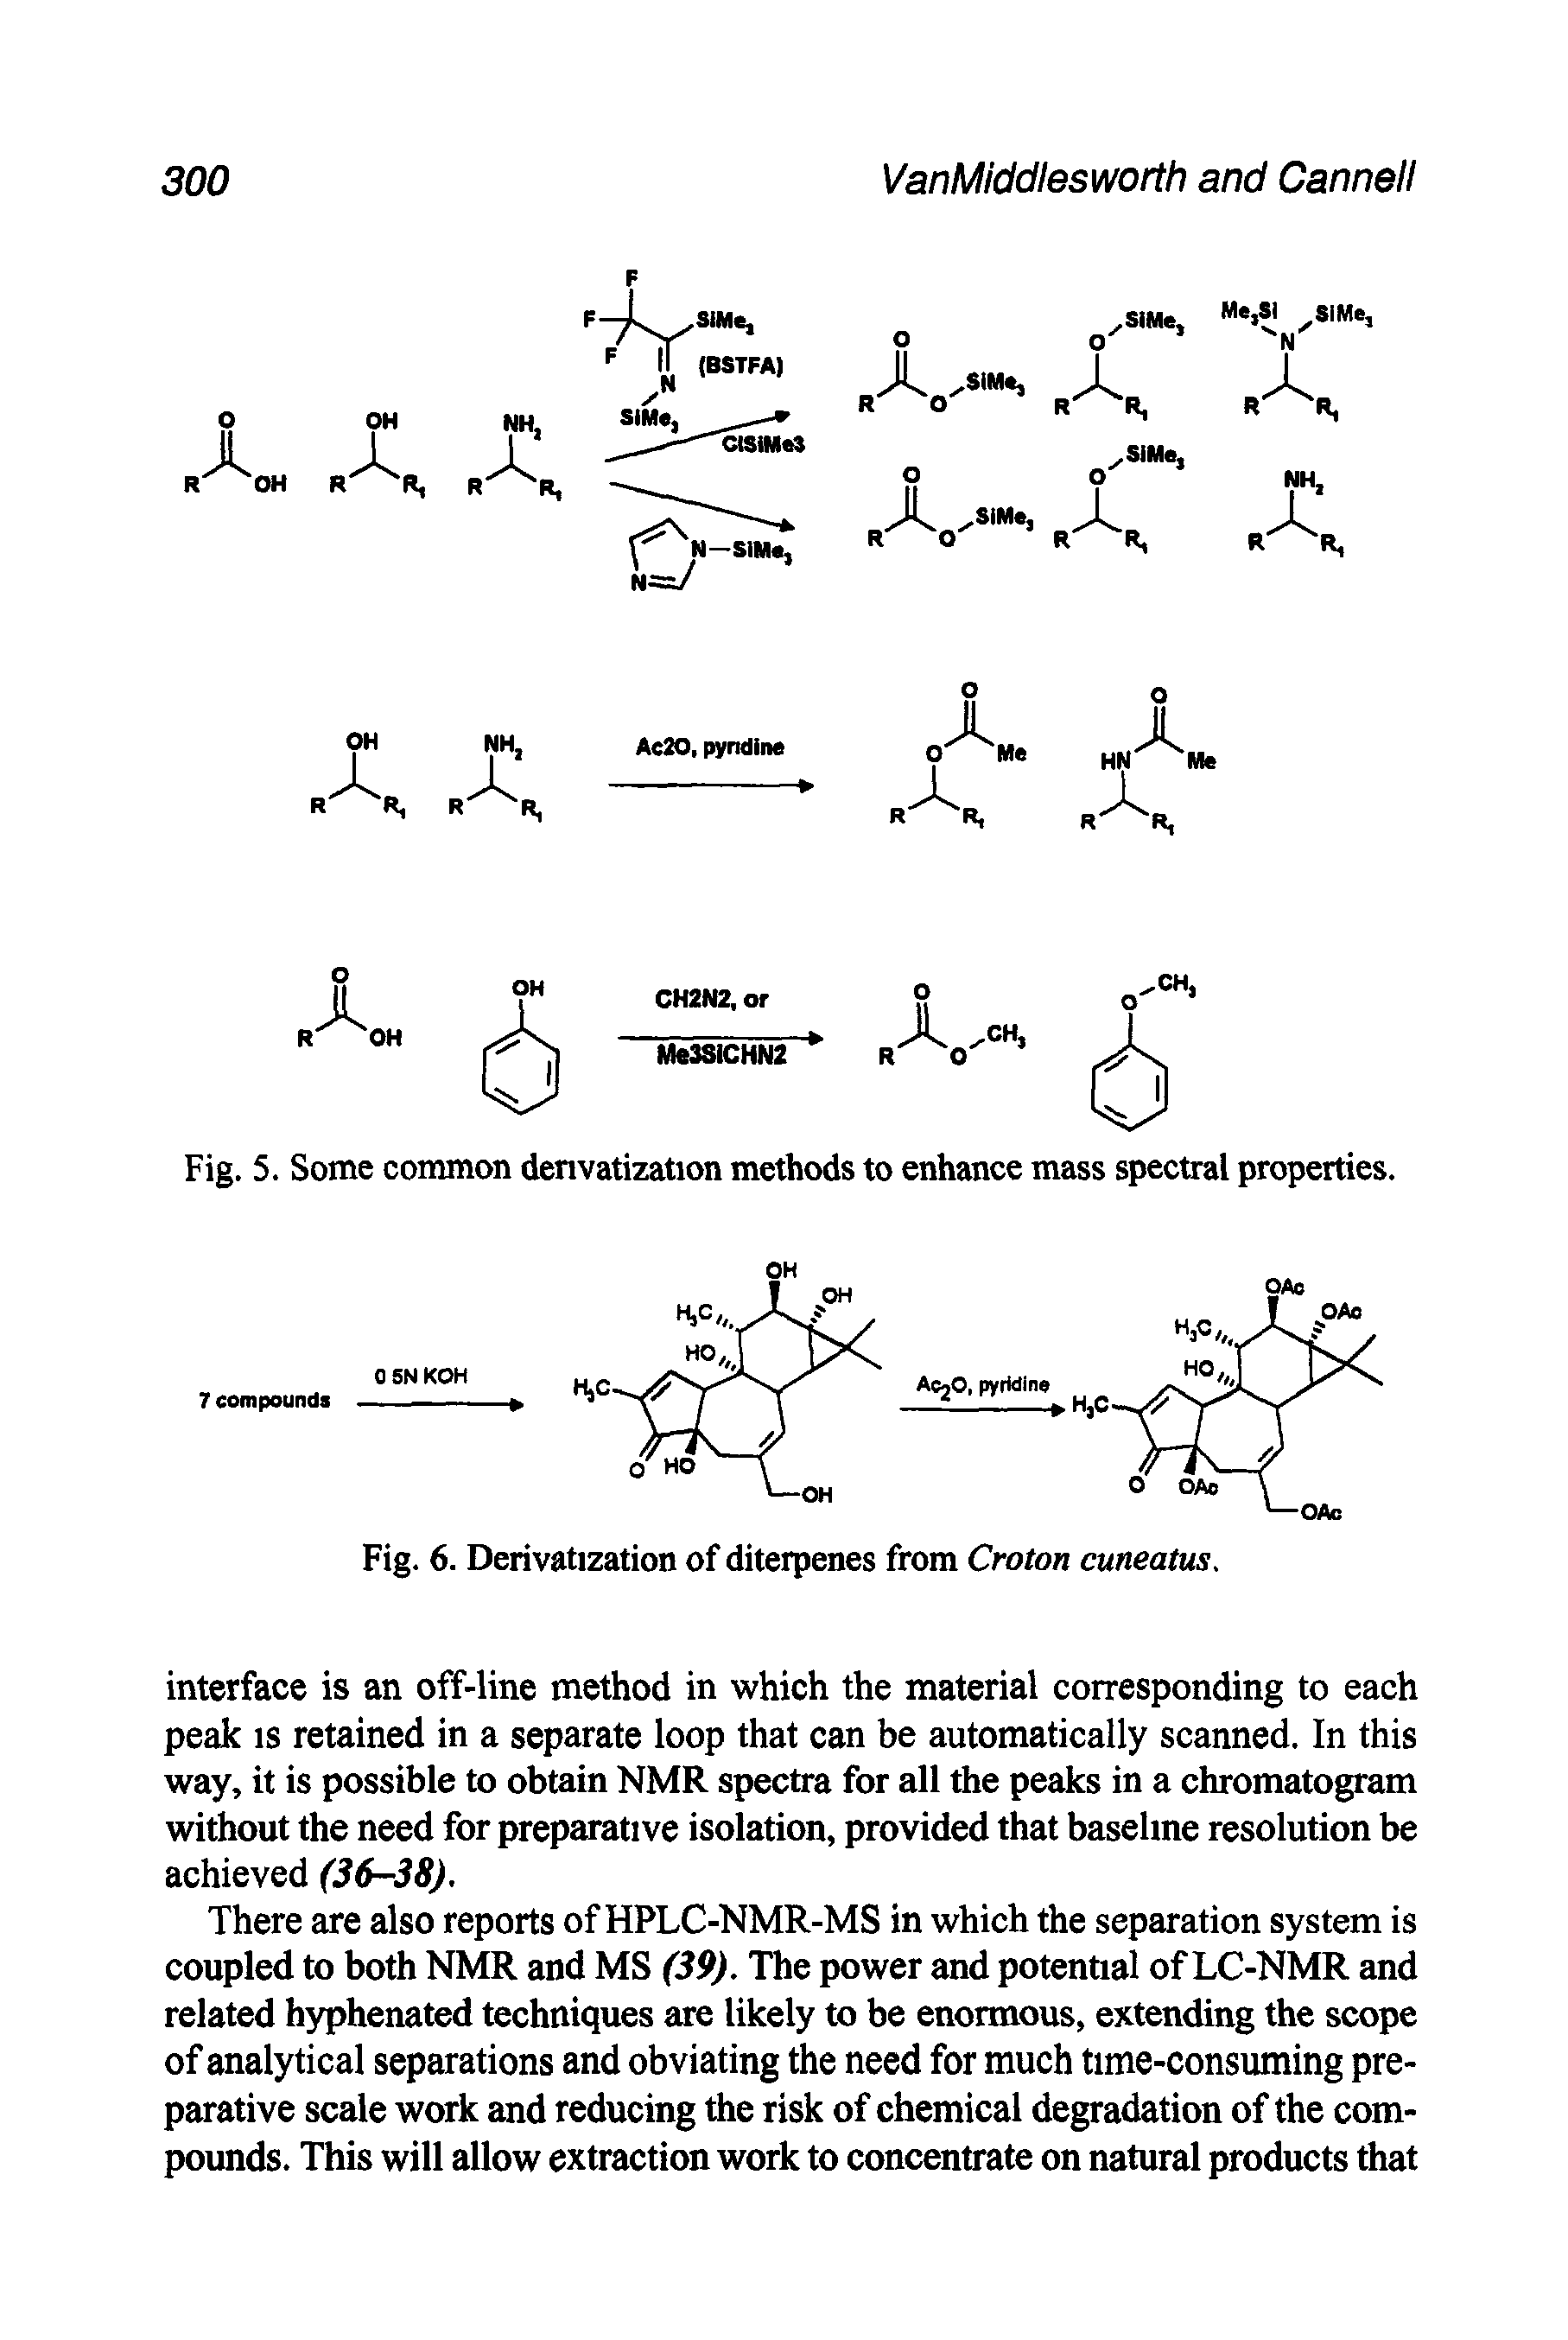 Fig. 5. Some common denvatization methods to enhance mass spectral properties.